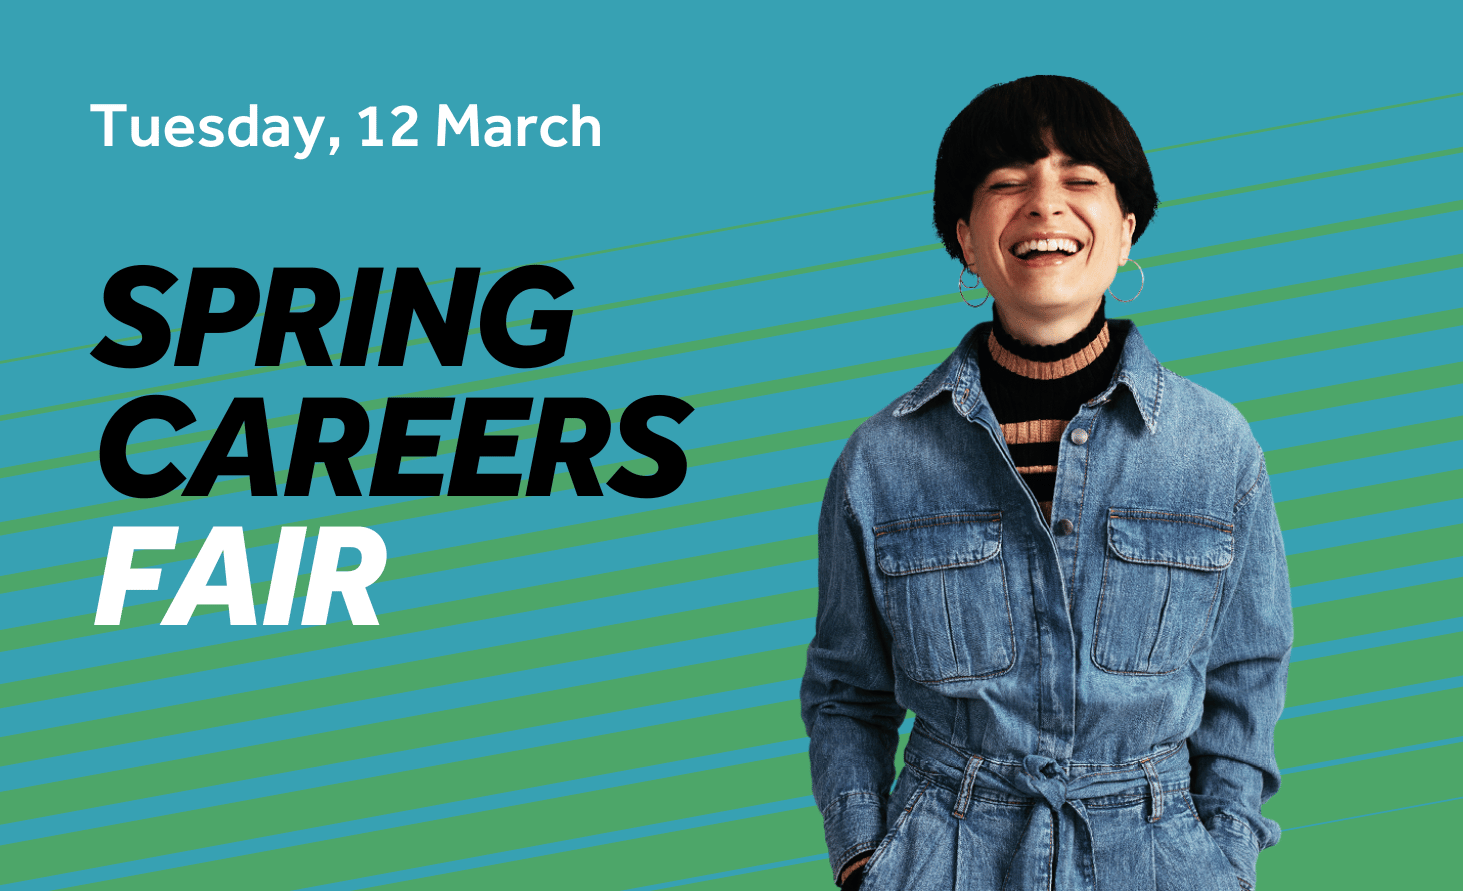 Teal background with green diagonal lines. Image features a smiling student with hands in pockets. Text reads: Spring Careers Fair, Tuesday, 12 March